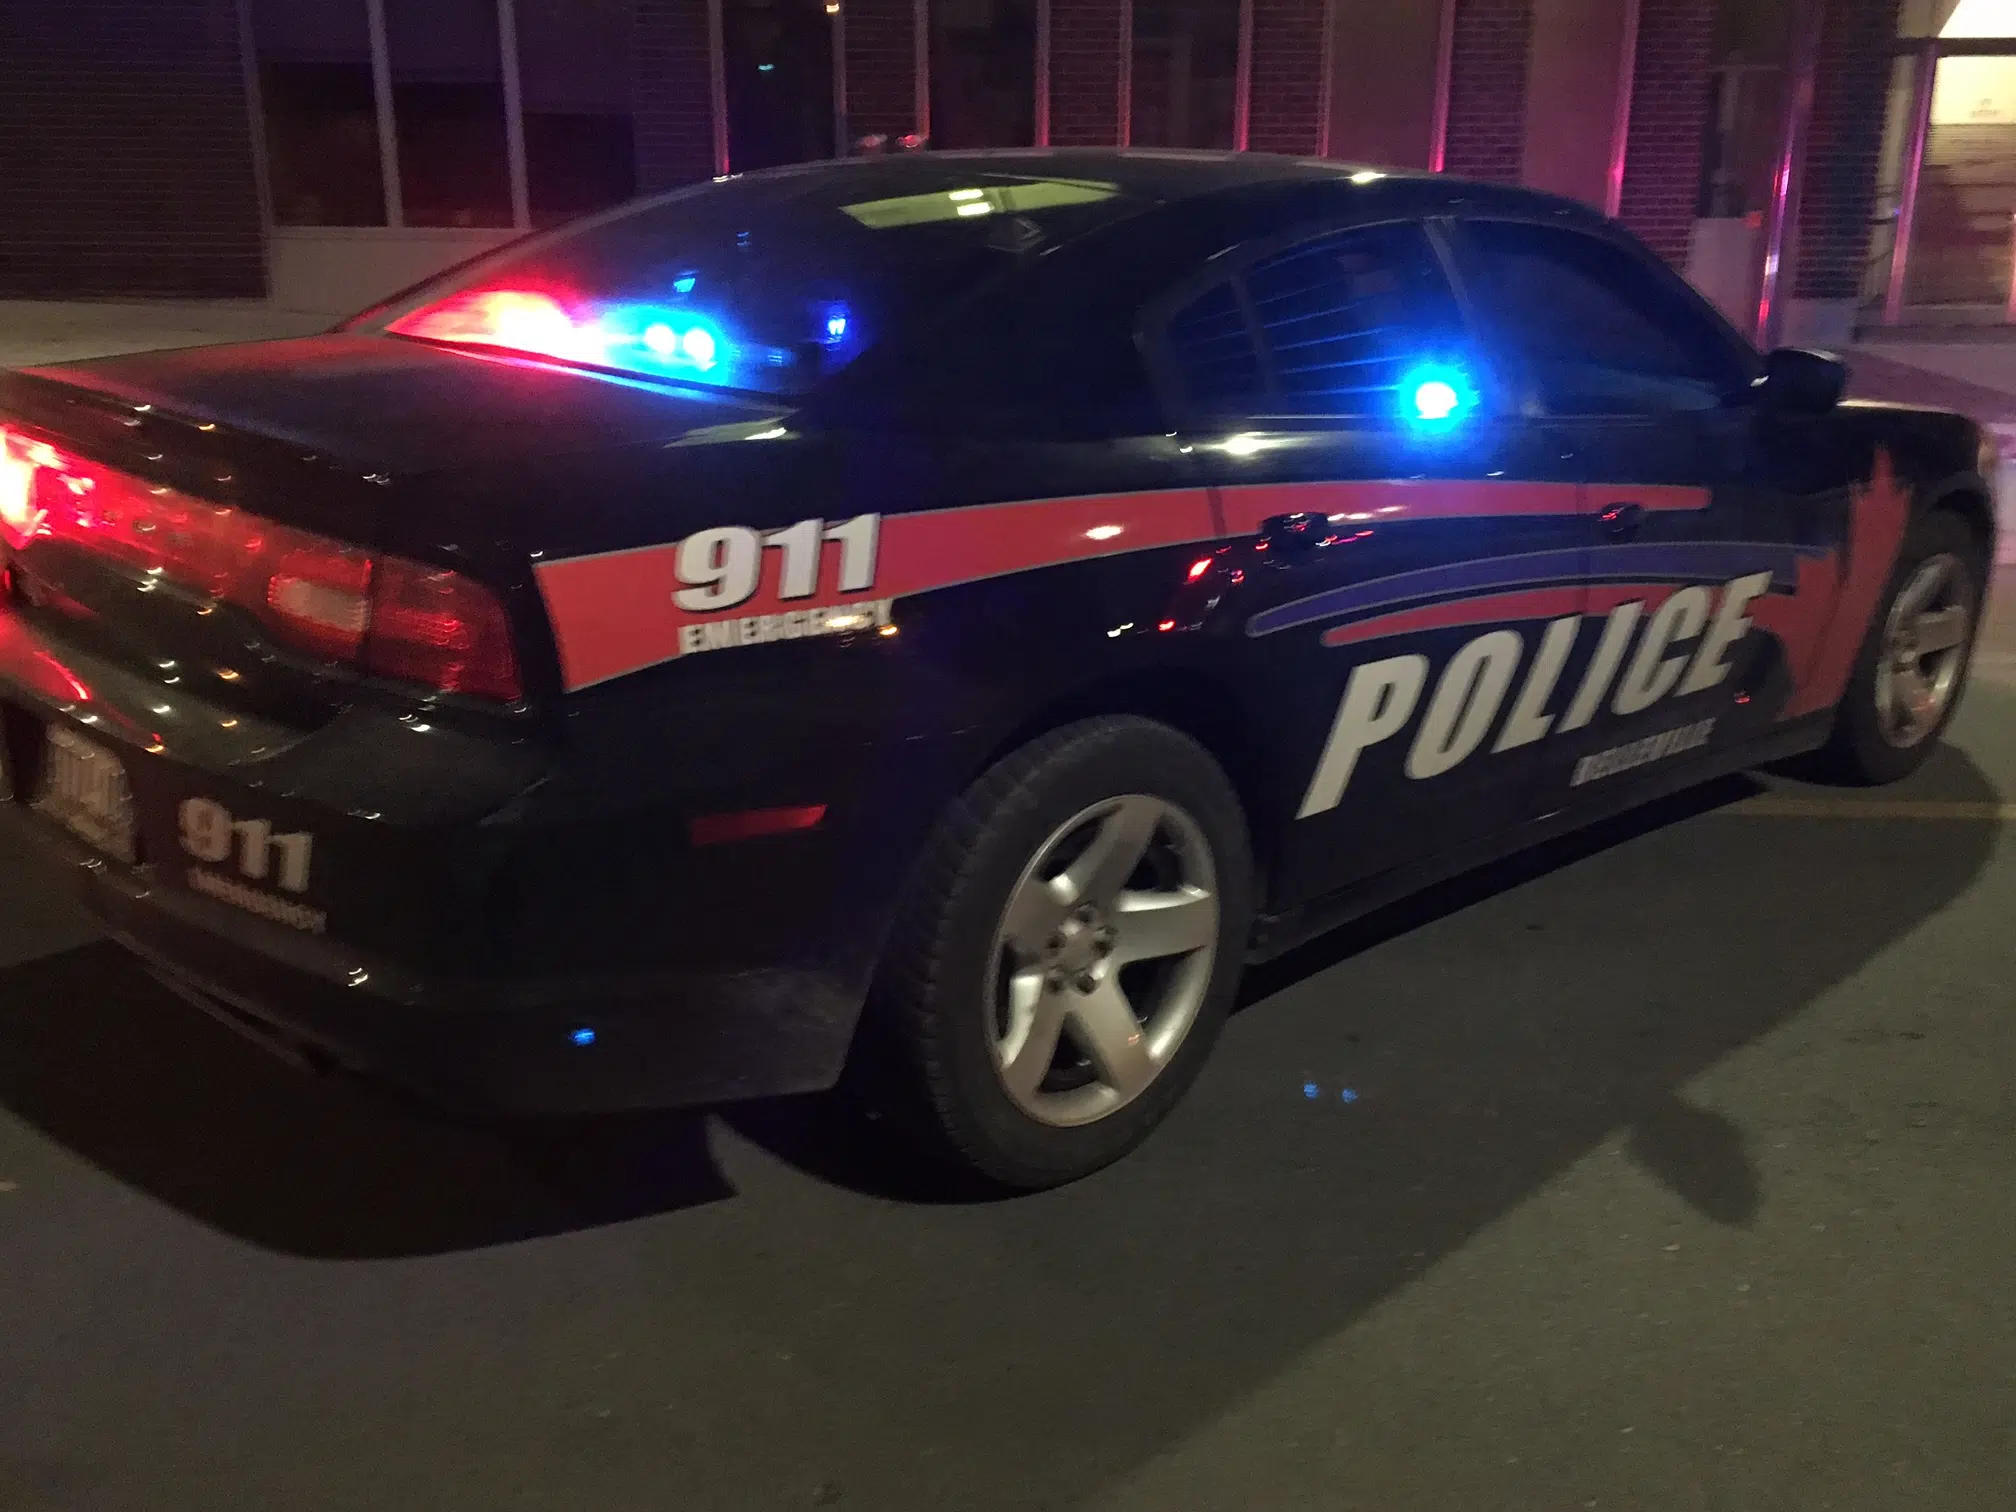 Belleville Police to host open house discussion this month